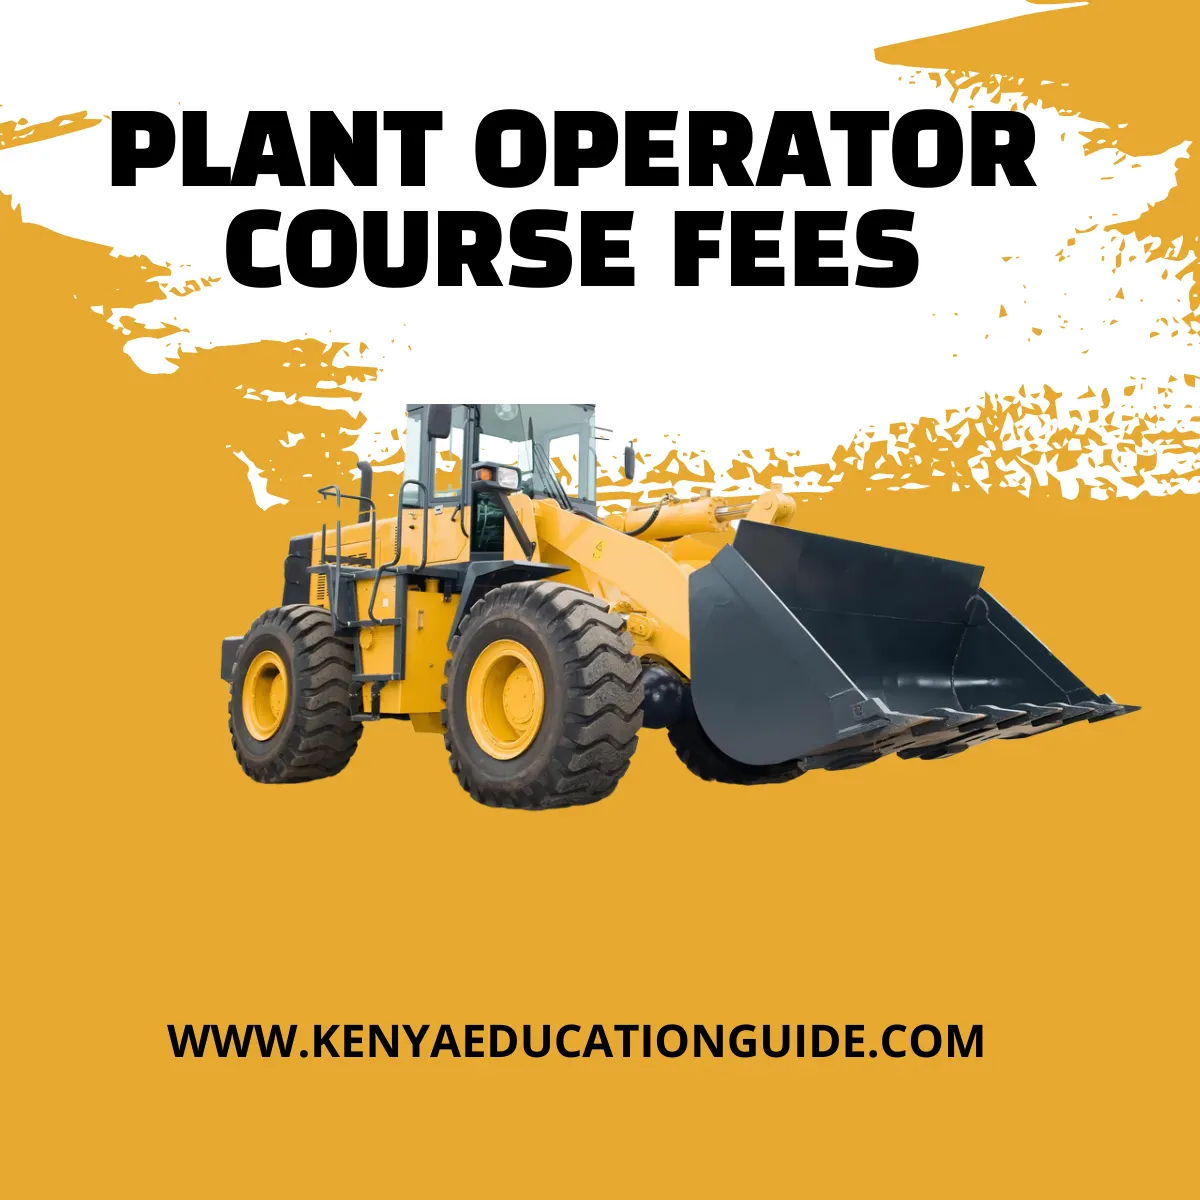 Plant Operator Course Fees